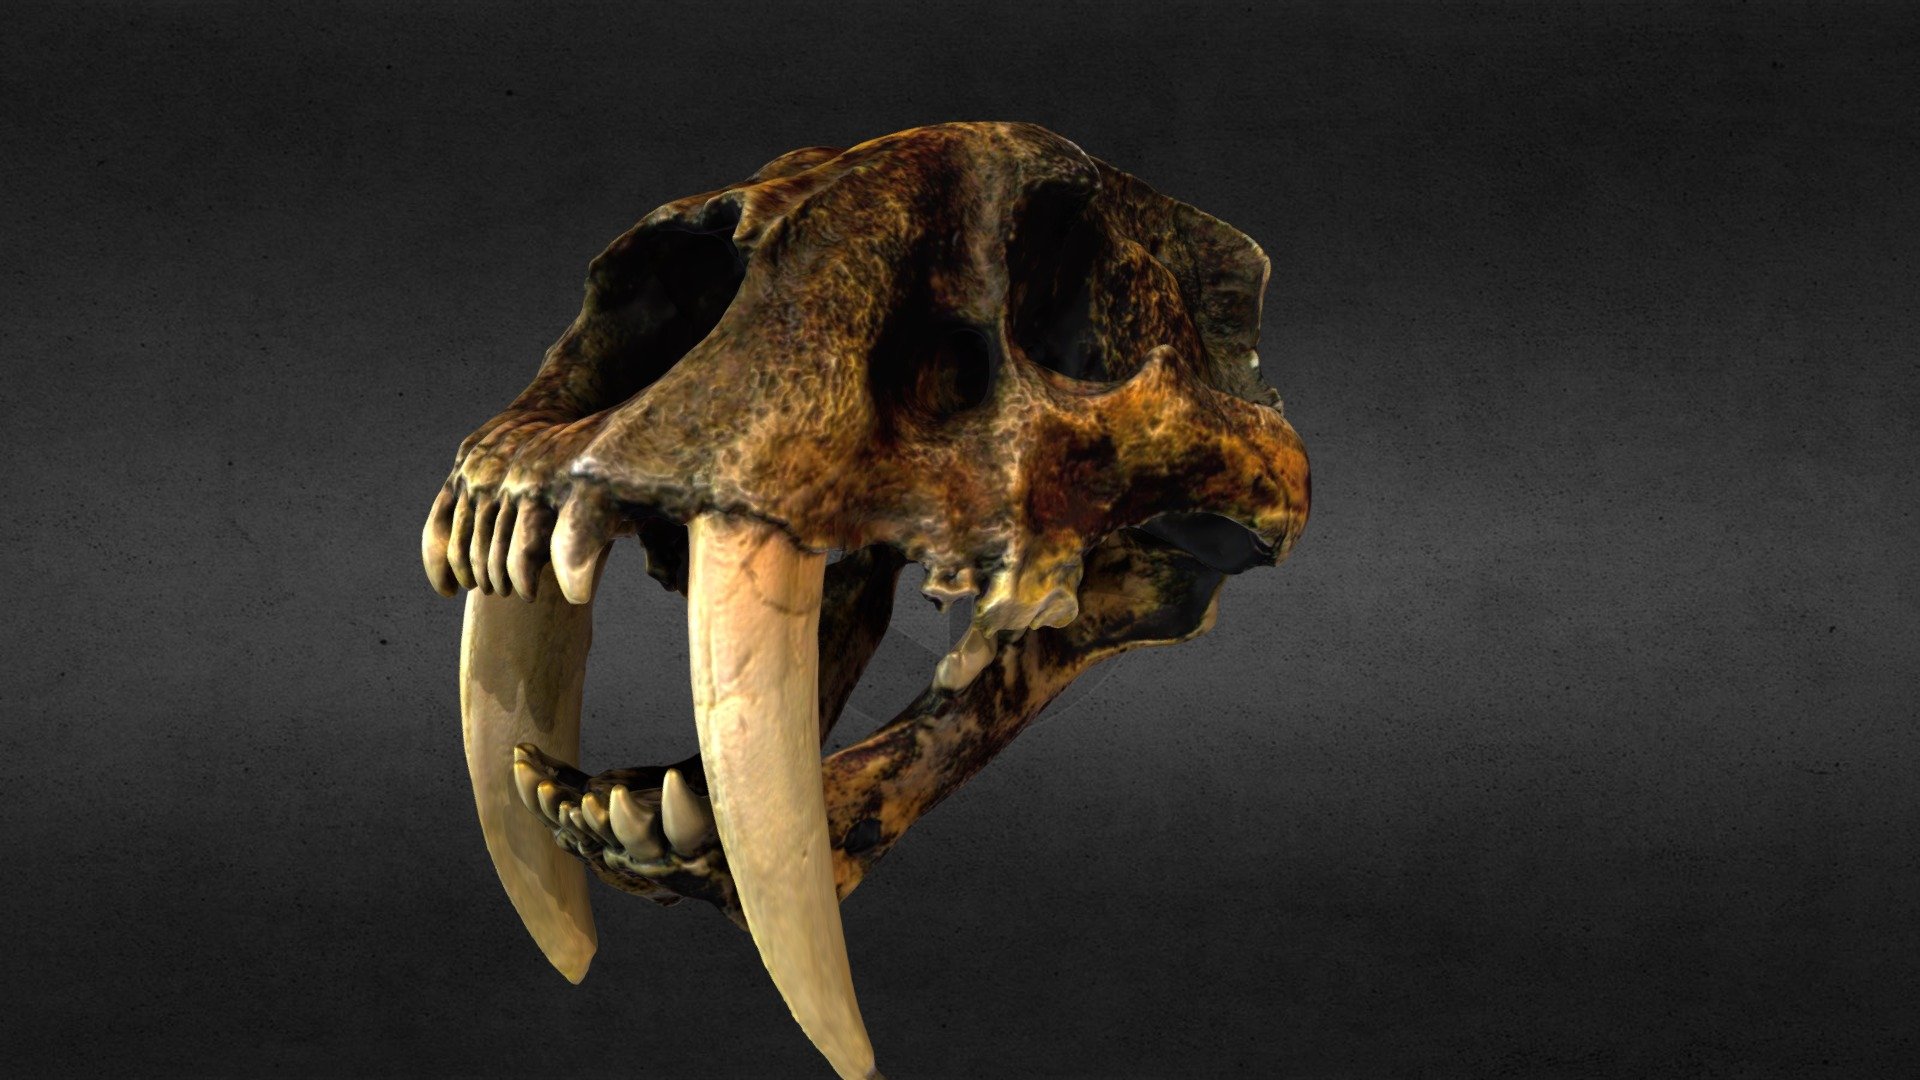 This is a 3d scan of one of our skull models.  A Sabre-Toothed Cat 3d model